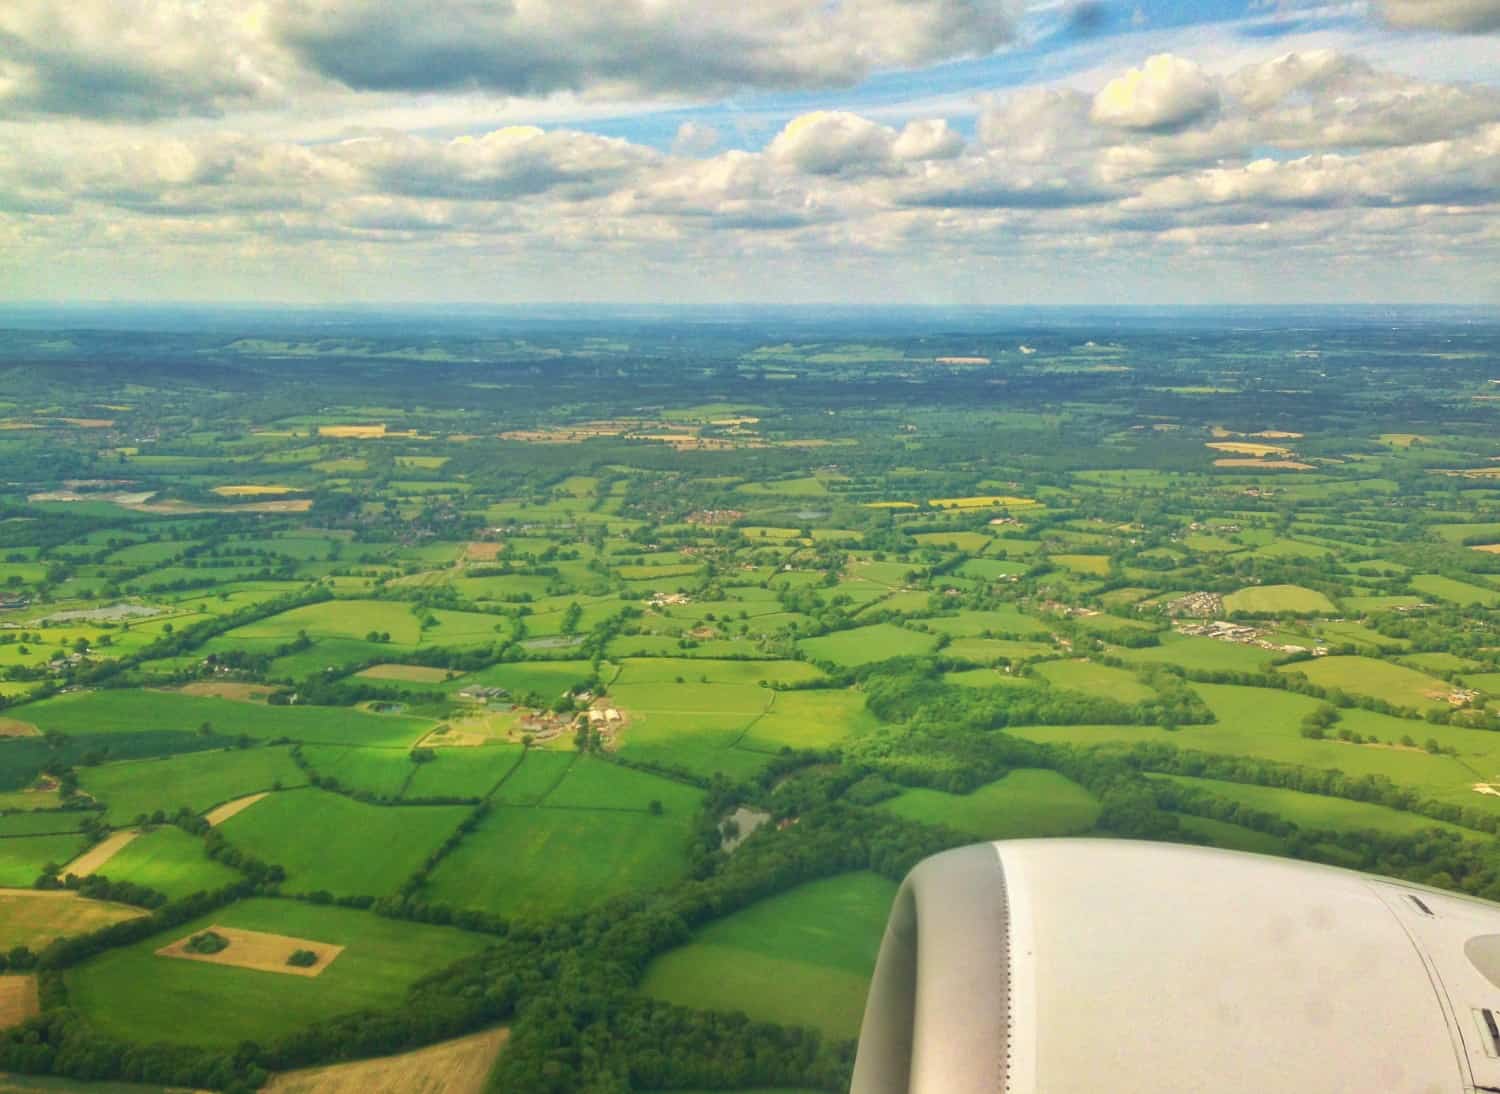 Views flying into London